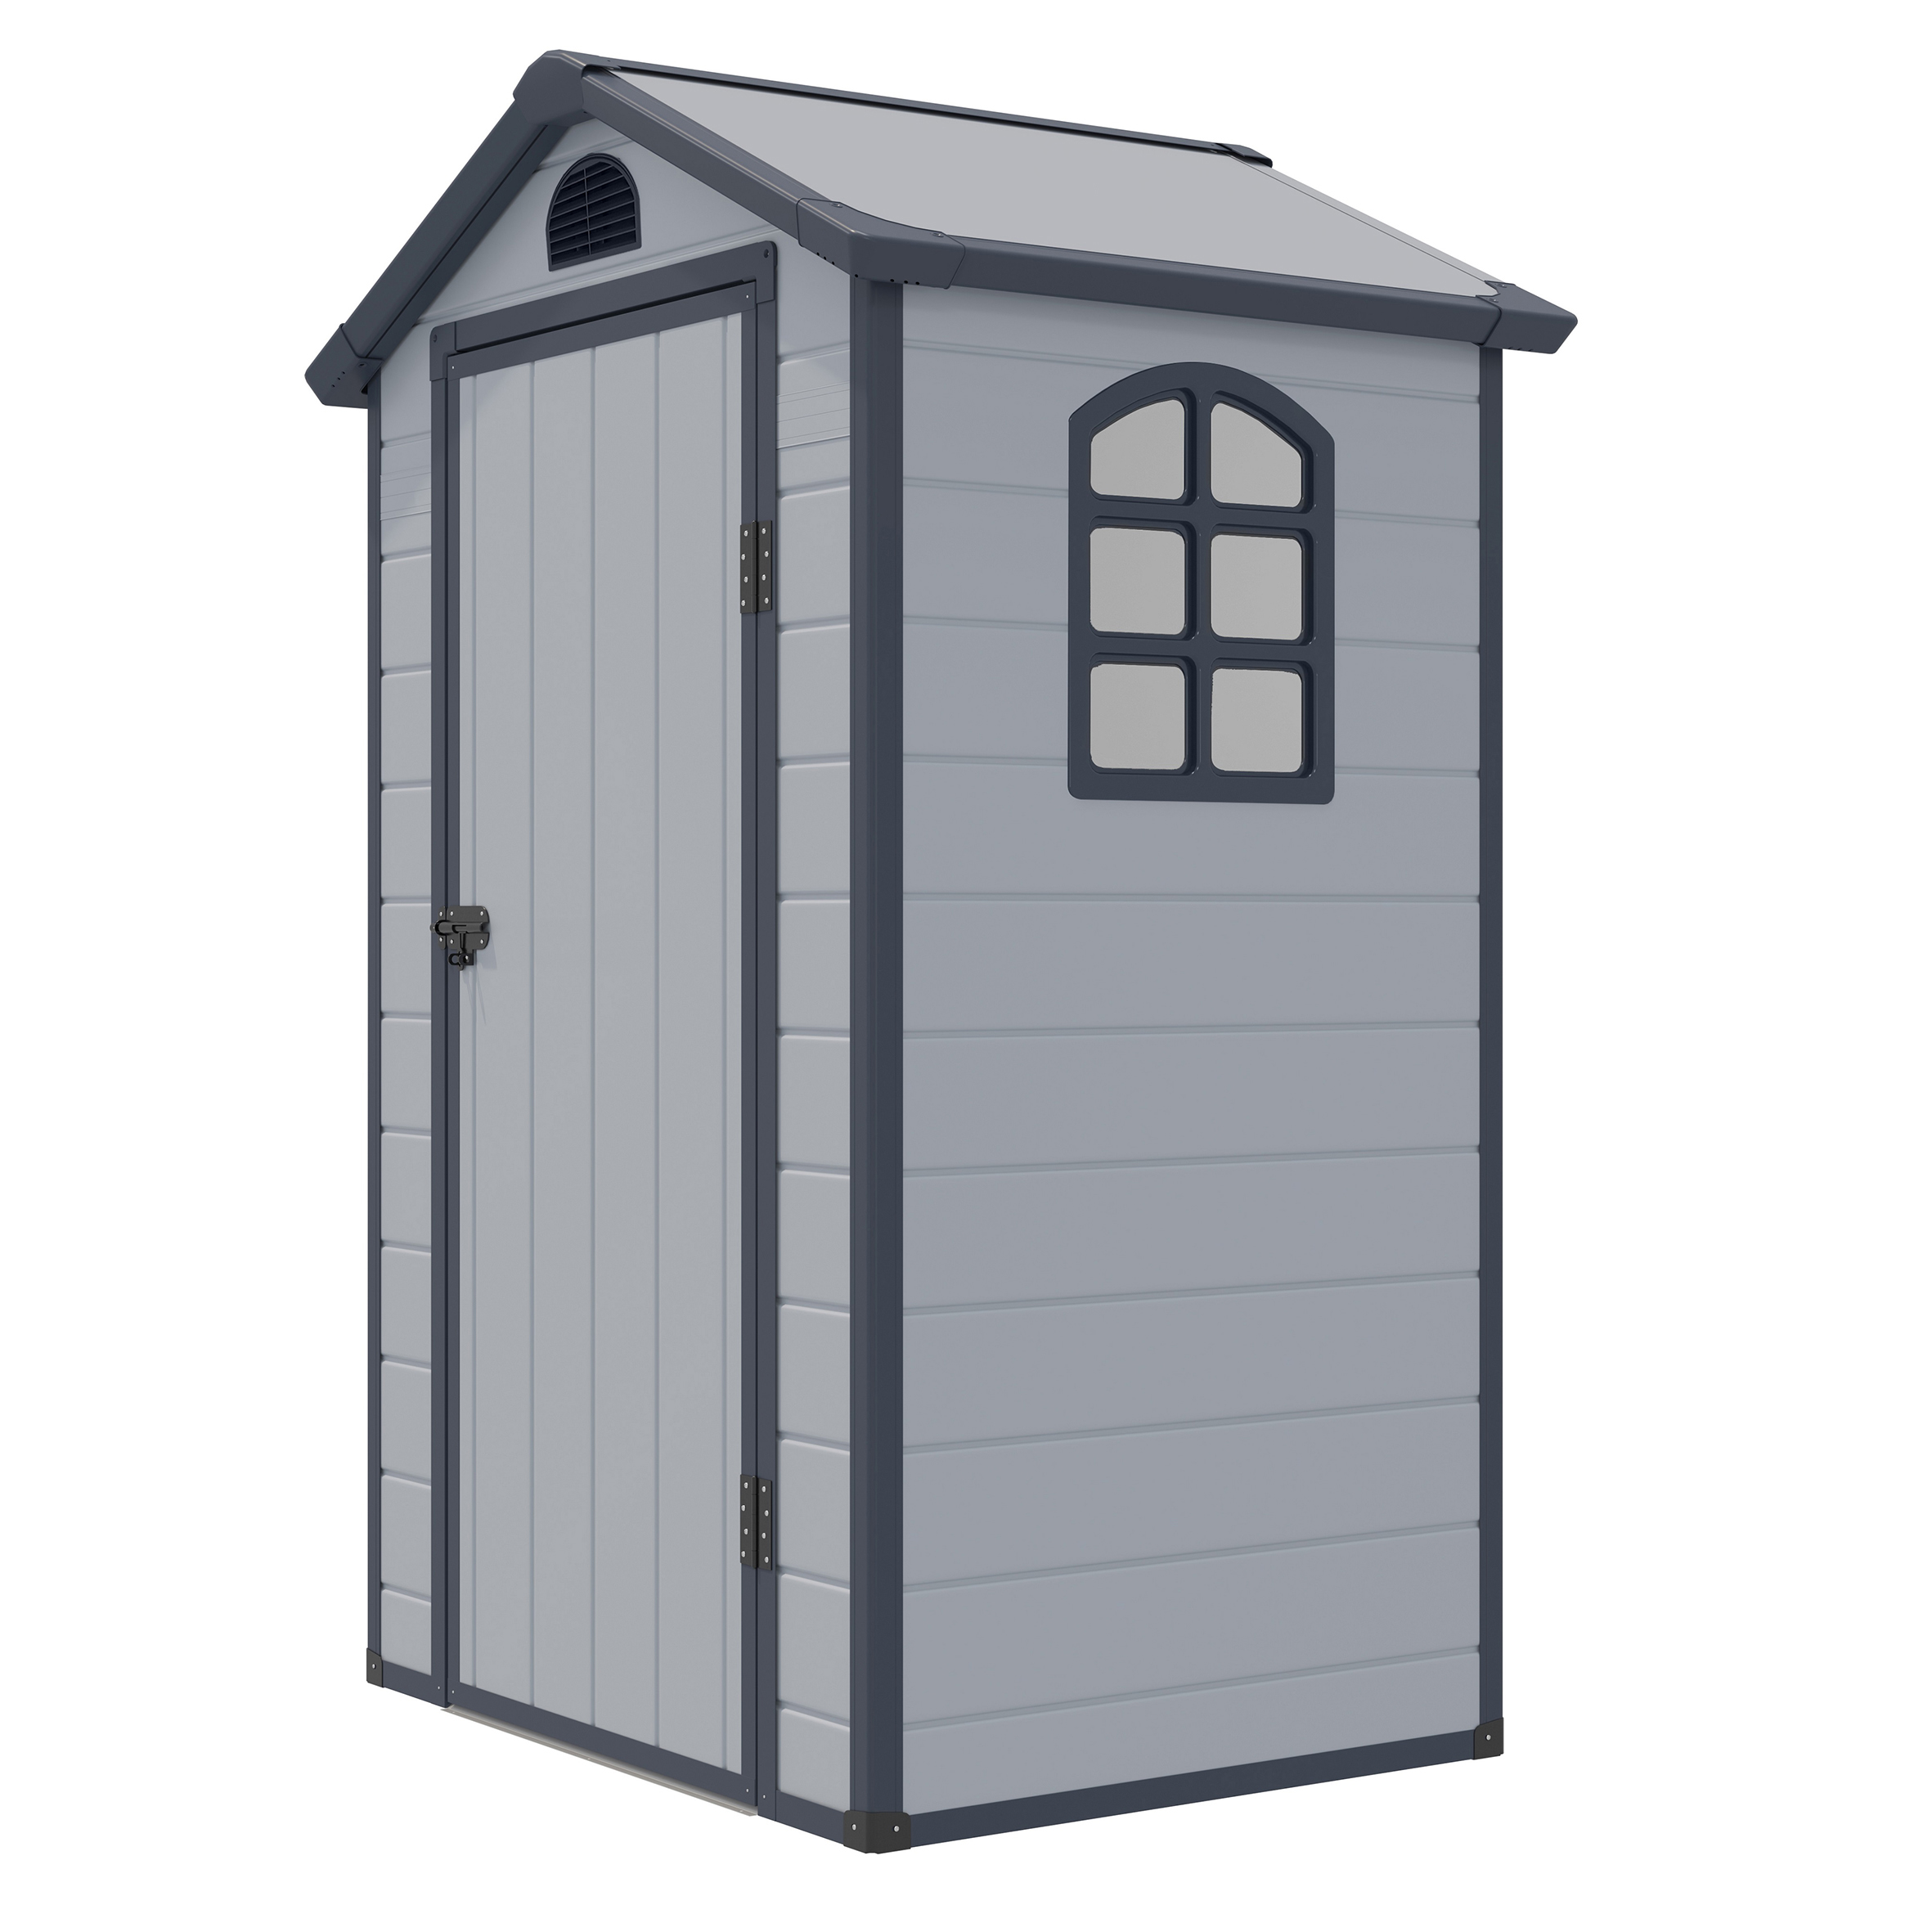 Featured image for “RGP | Airevale™ Apex Shed 4x3 (Light Grey)”